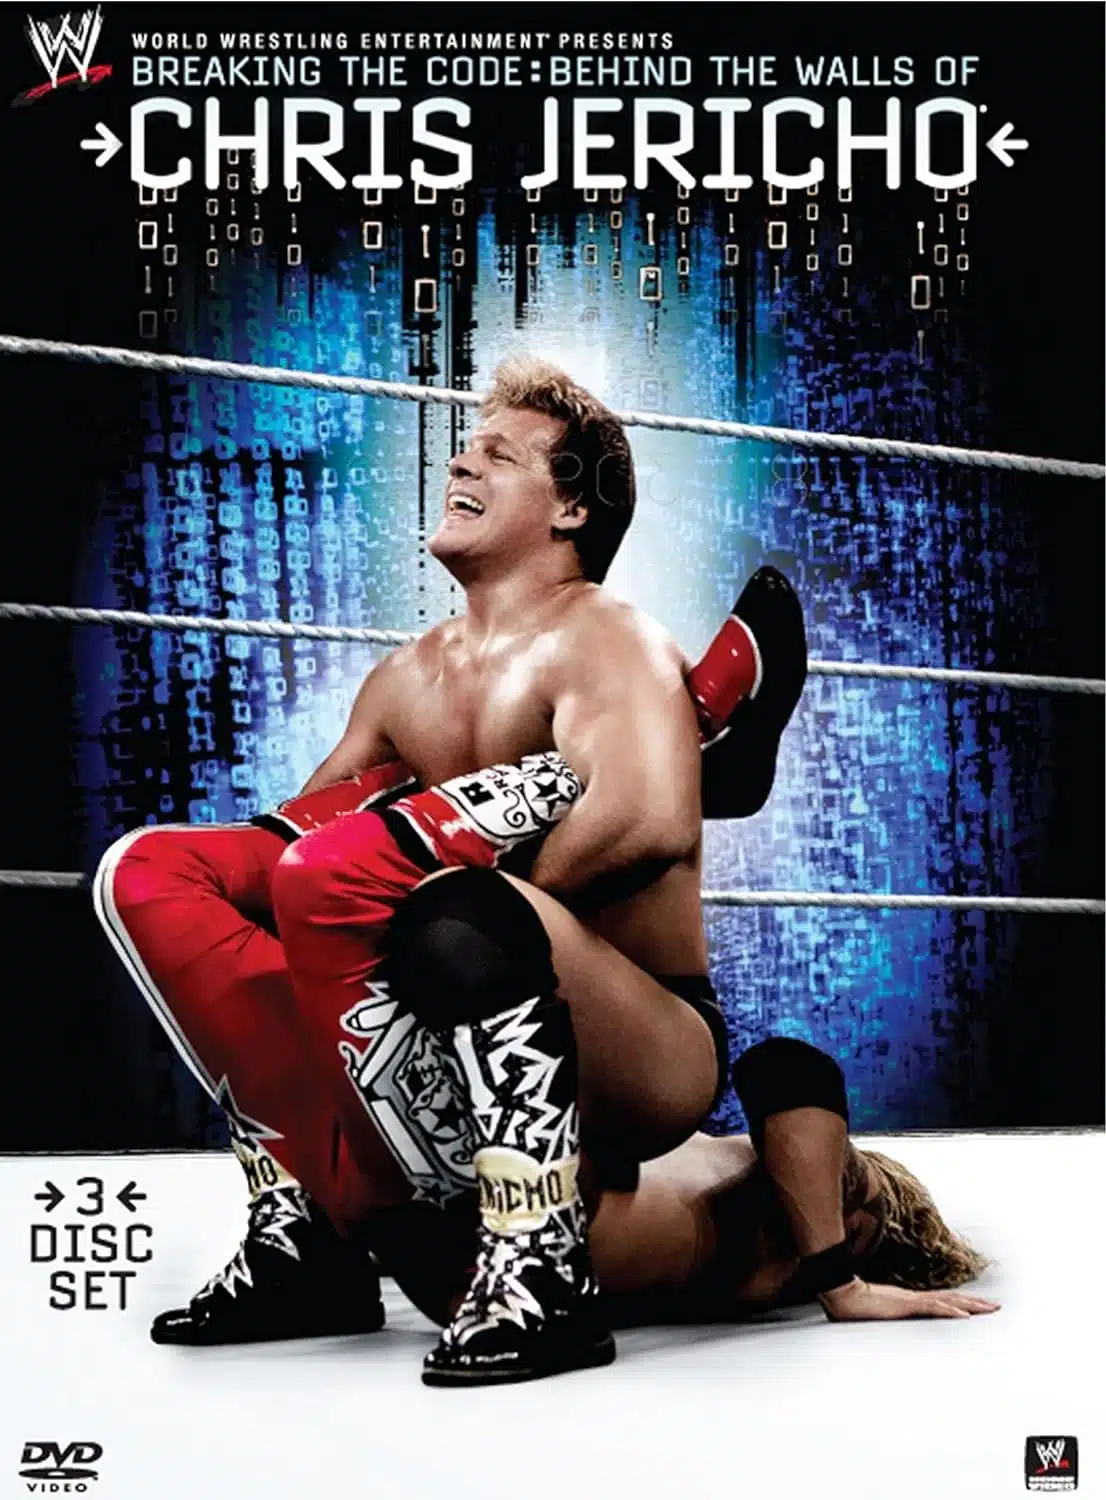 Breaking the Code DVD cover